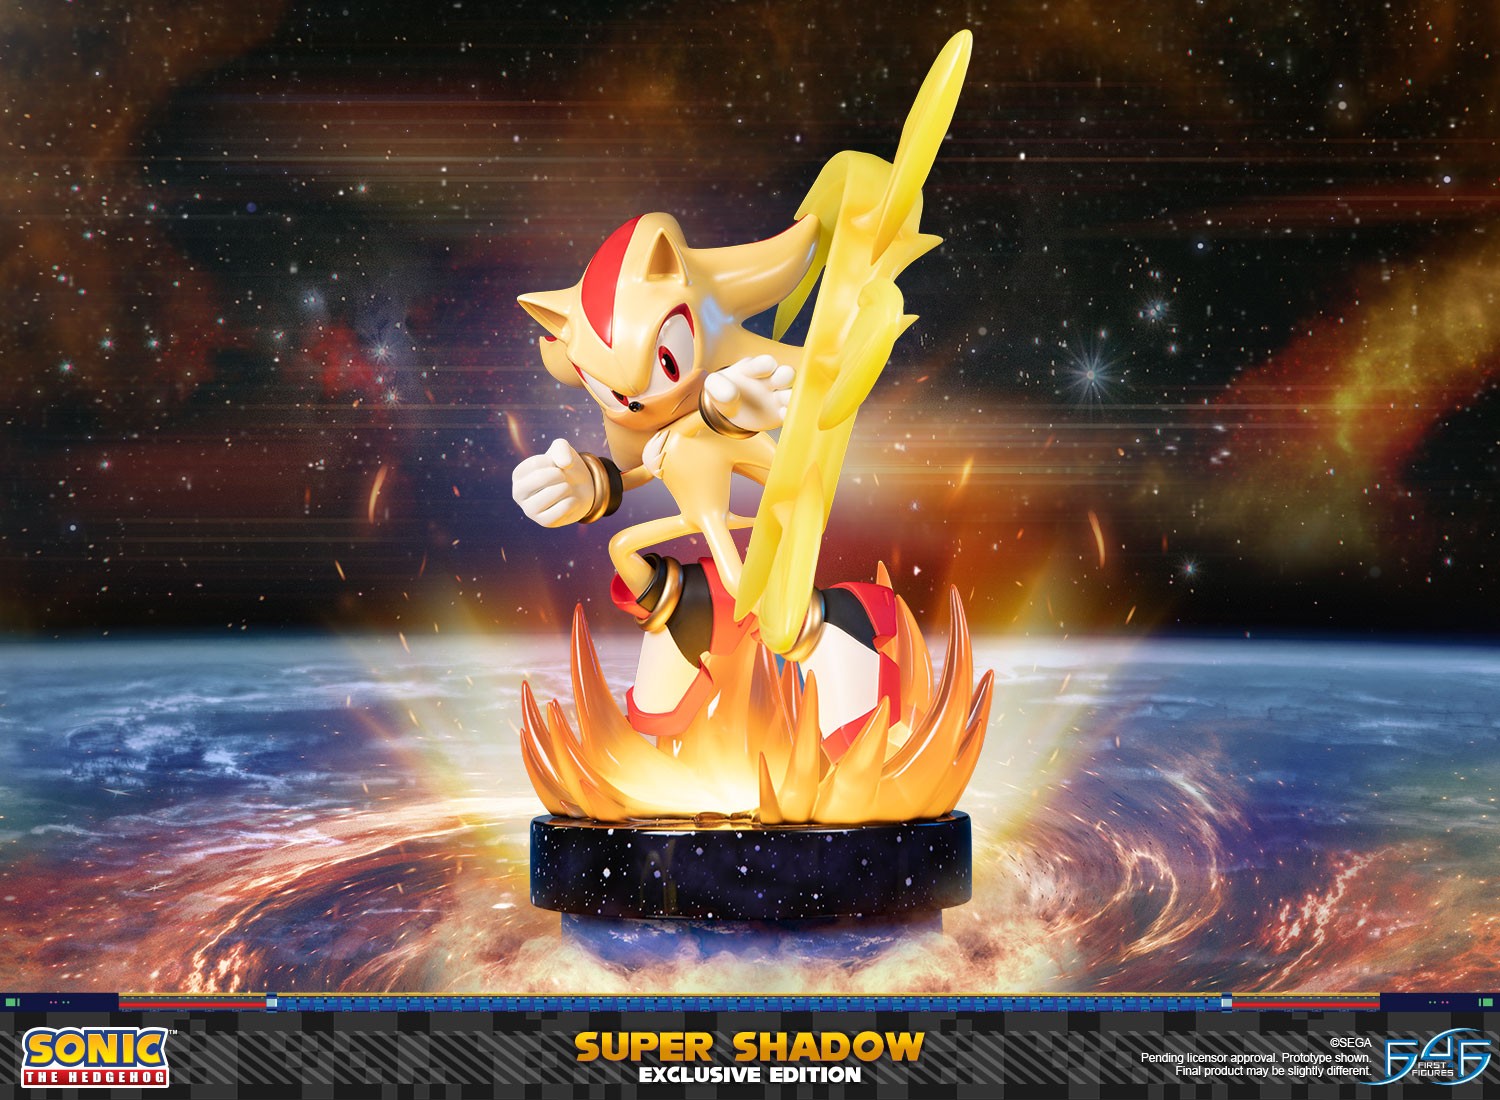 Sonic the Hedgehog™ – Super Shadow (Exclusive Edition)